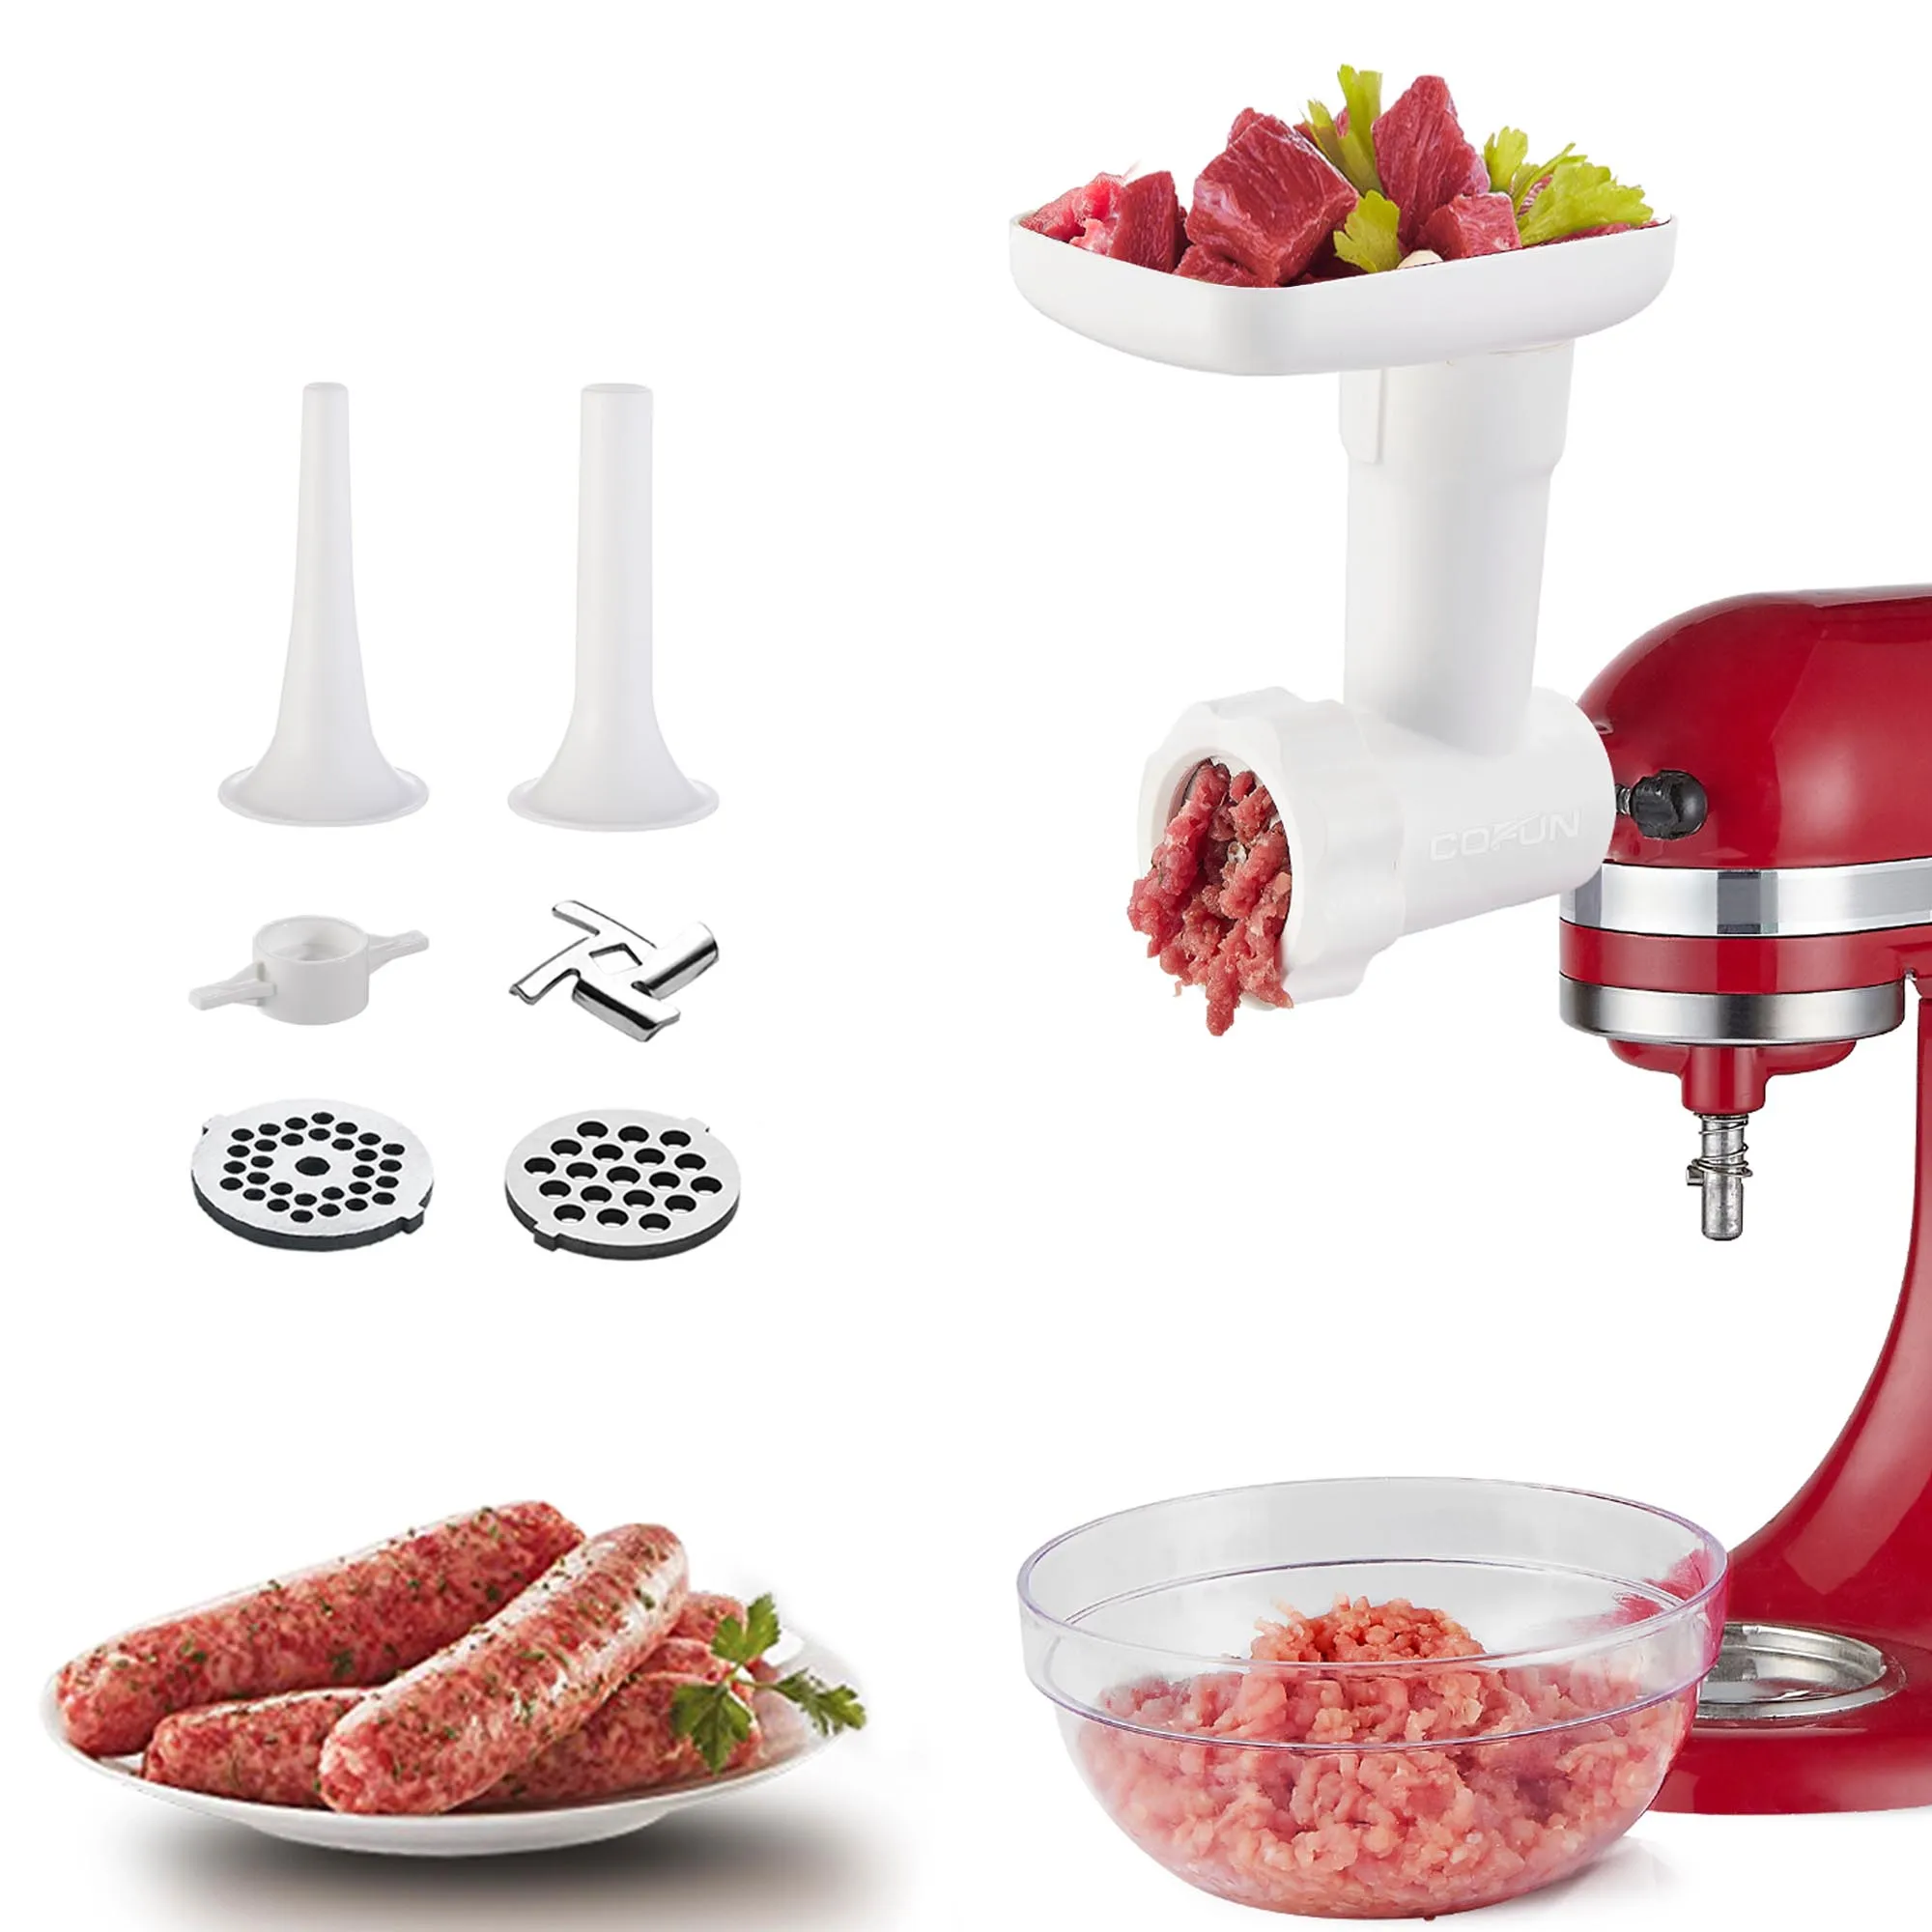 https://ae01.alicdn.com/kf/He58a0925973b4328b16baa8e2def21e9k/COOLCOOK-high-quality-food-meat-grinder-accessory-for-Kitchenaid-stand-mixer-including-sausage-filling-tube-kit.jpg